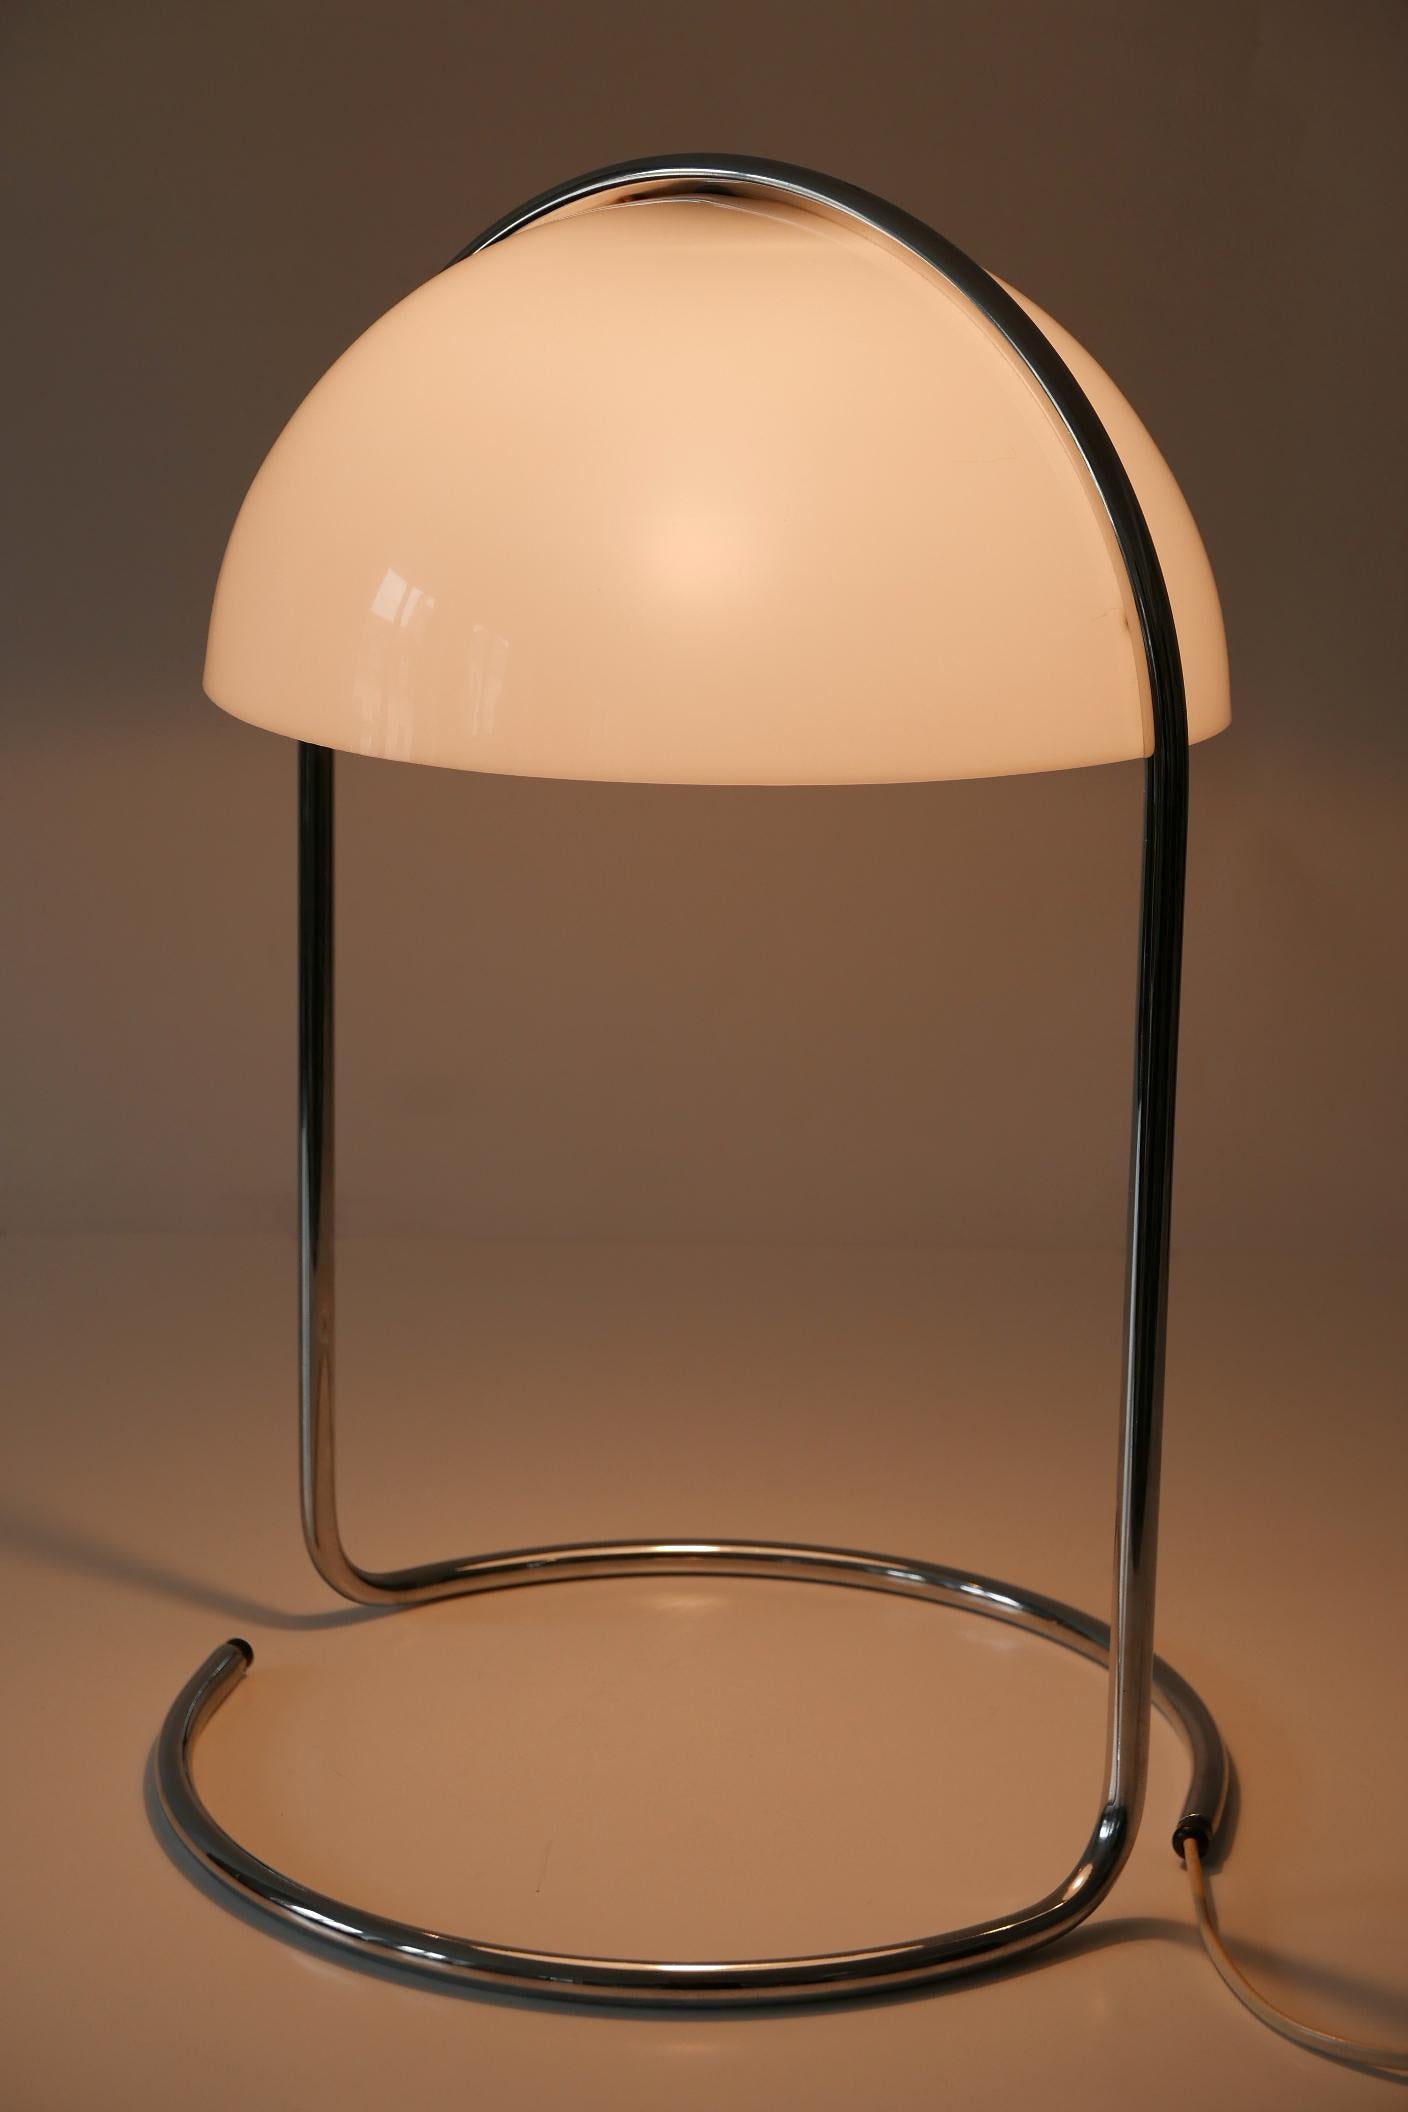 Plated Rare Mid-Century Modern Table Lamp MIRI by Neal Small for Nessen, 1970s, USA